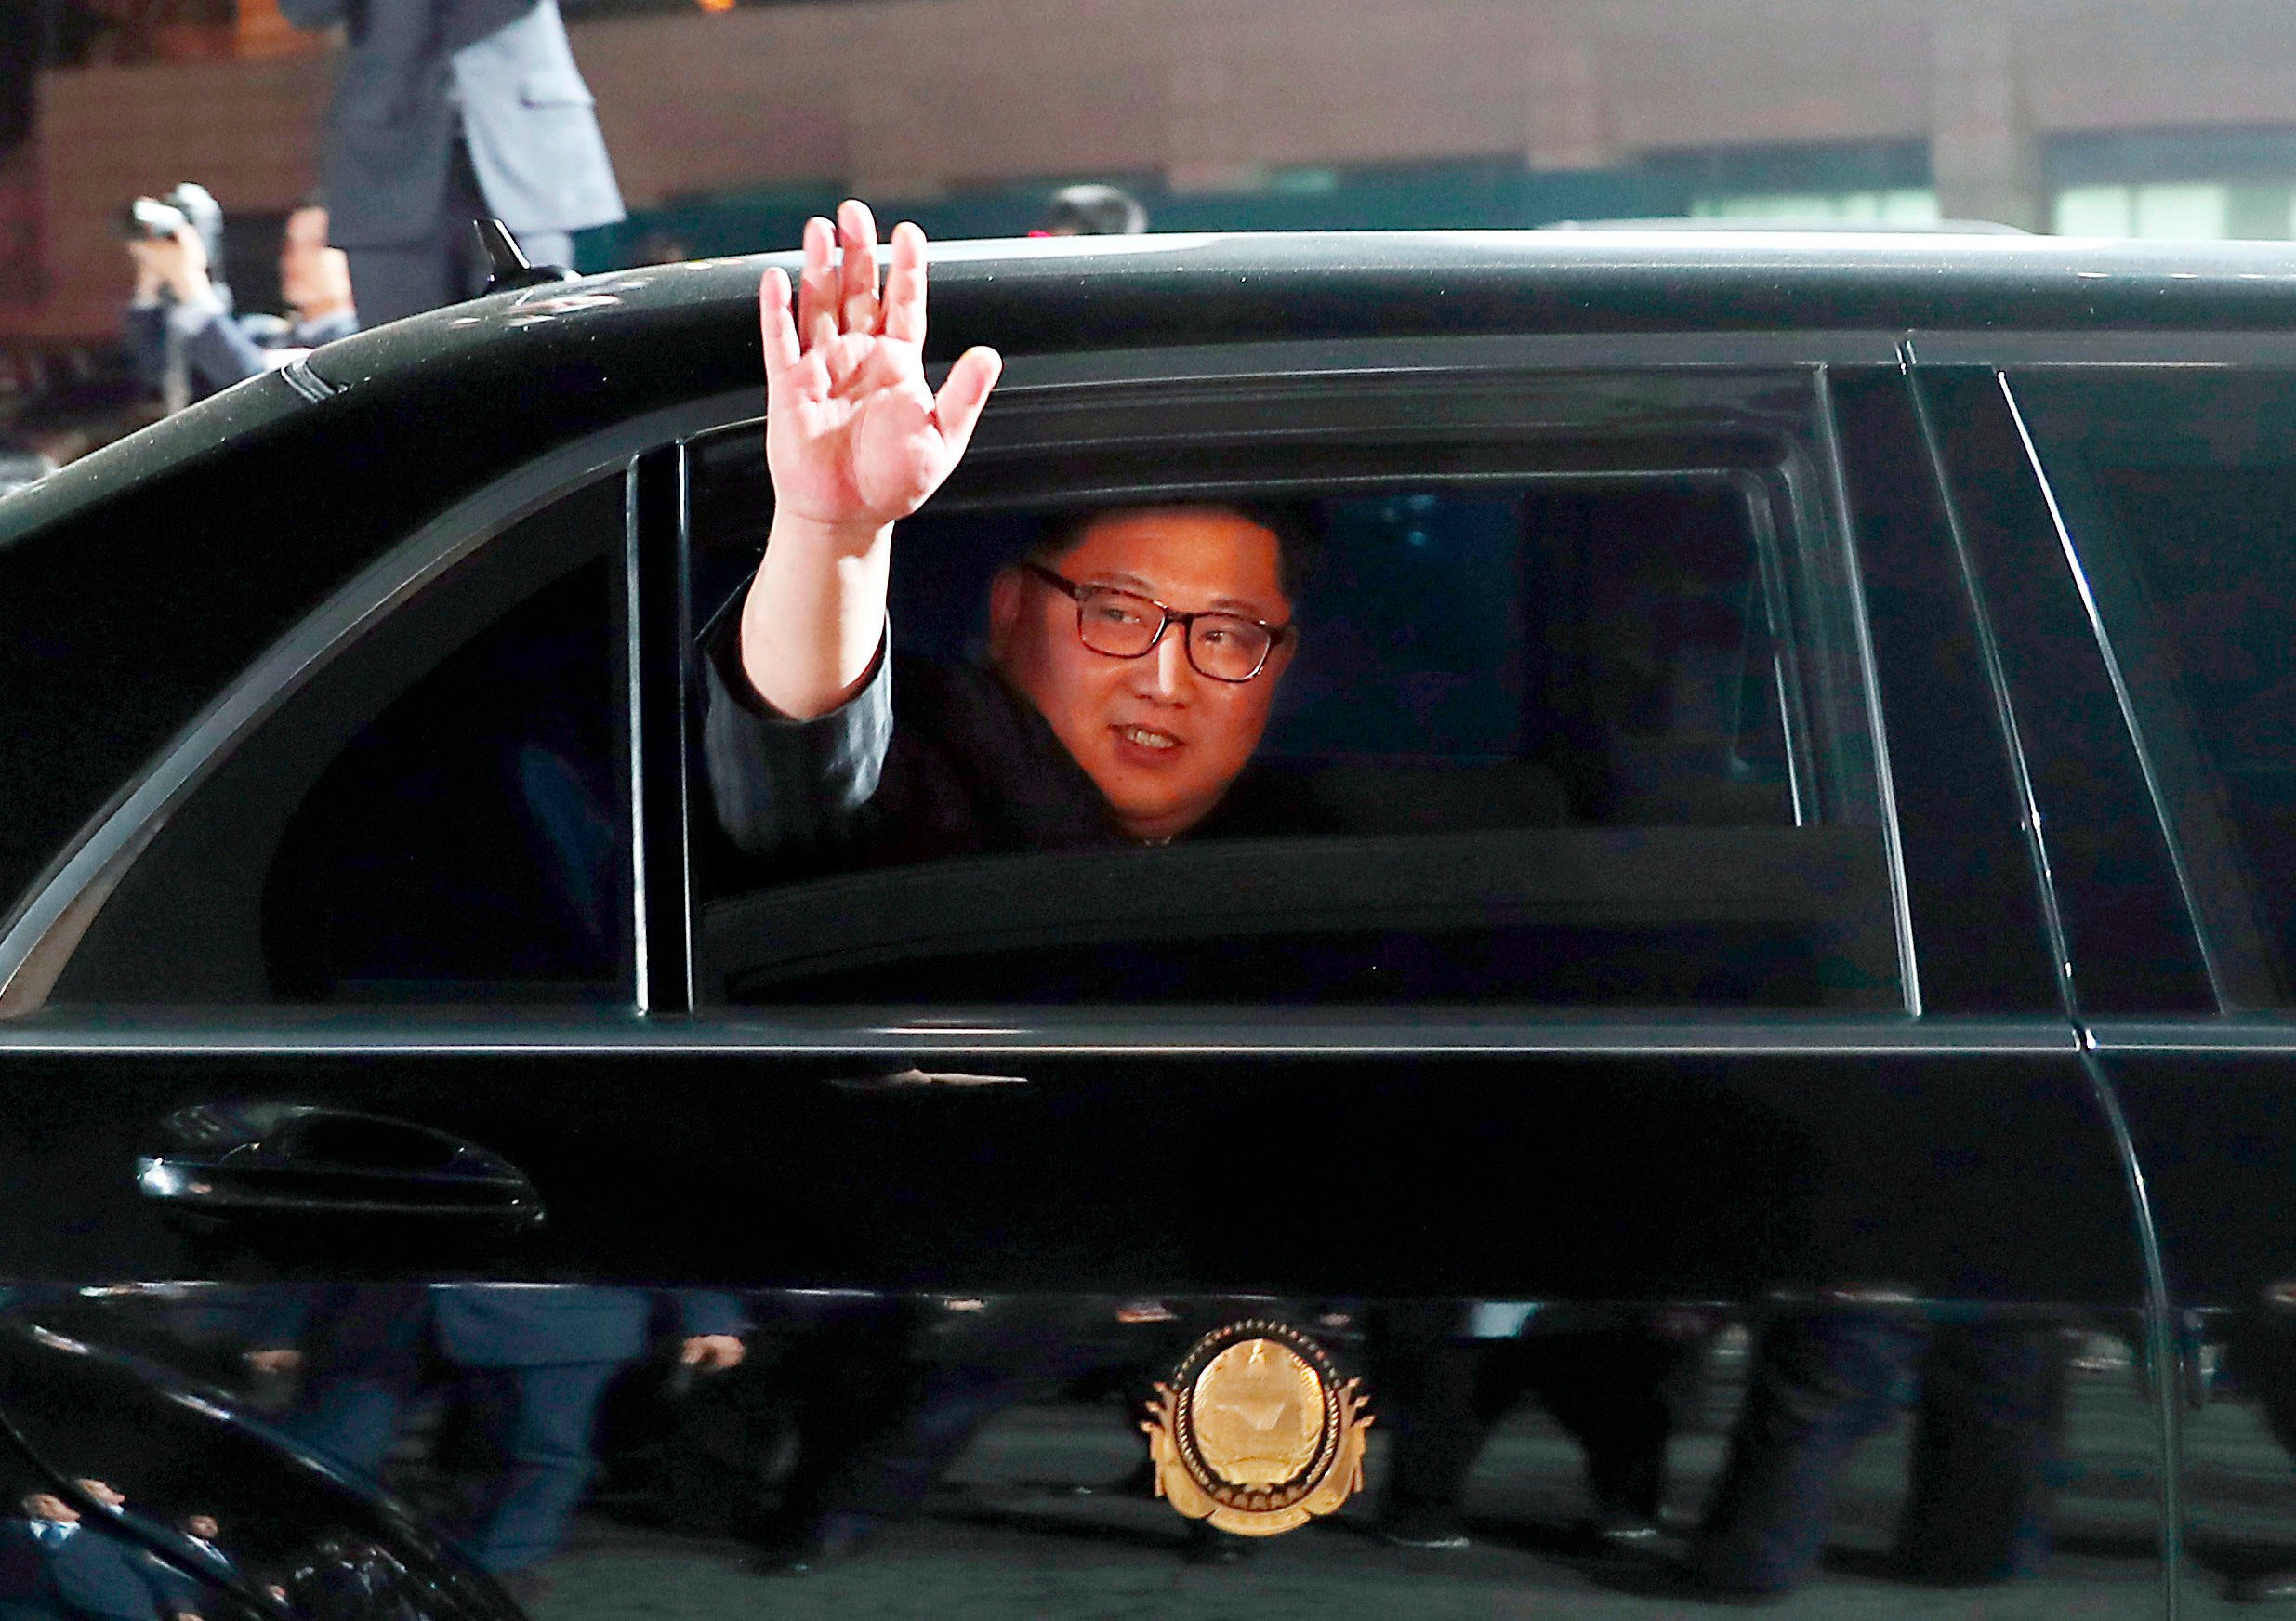 North Korean leader Kim Jong-un is known to be a “big fan of expensive cars”, observers say. Photo: AP